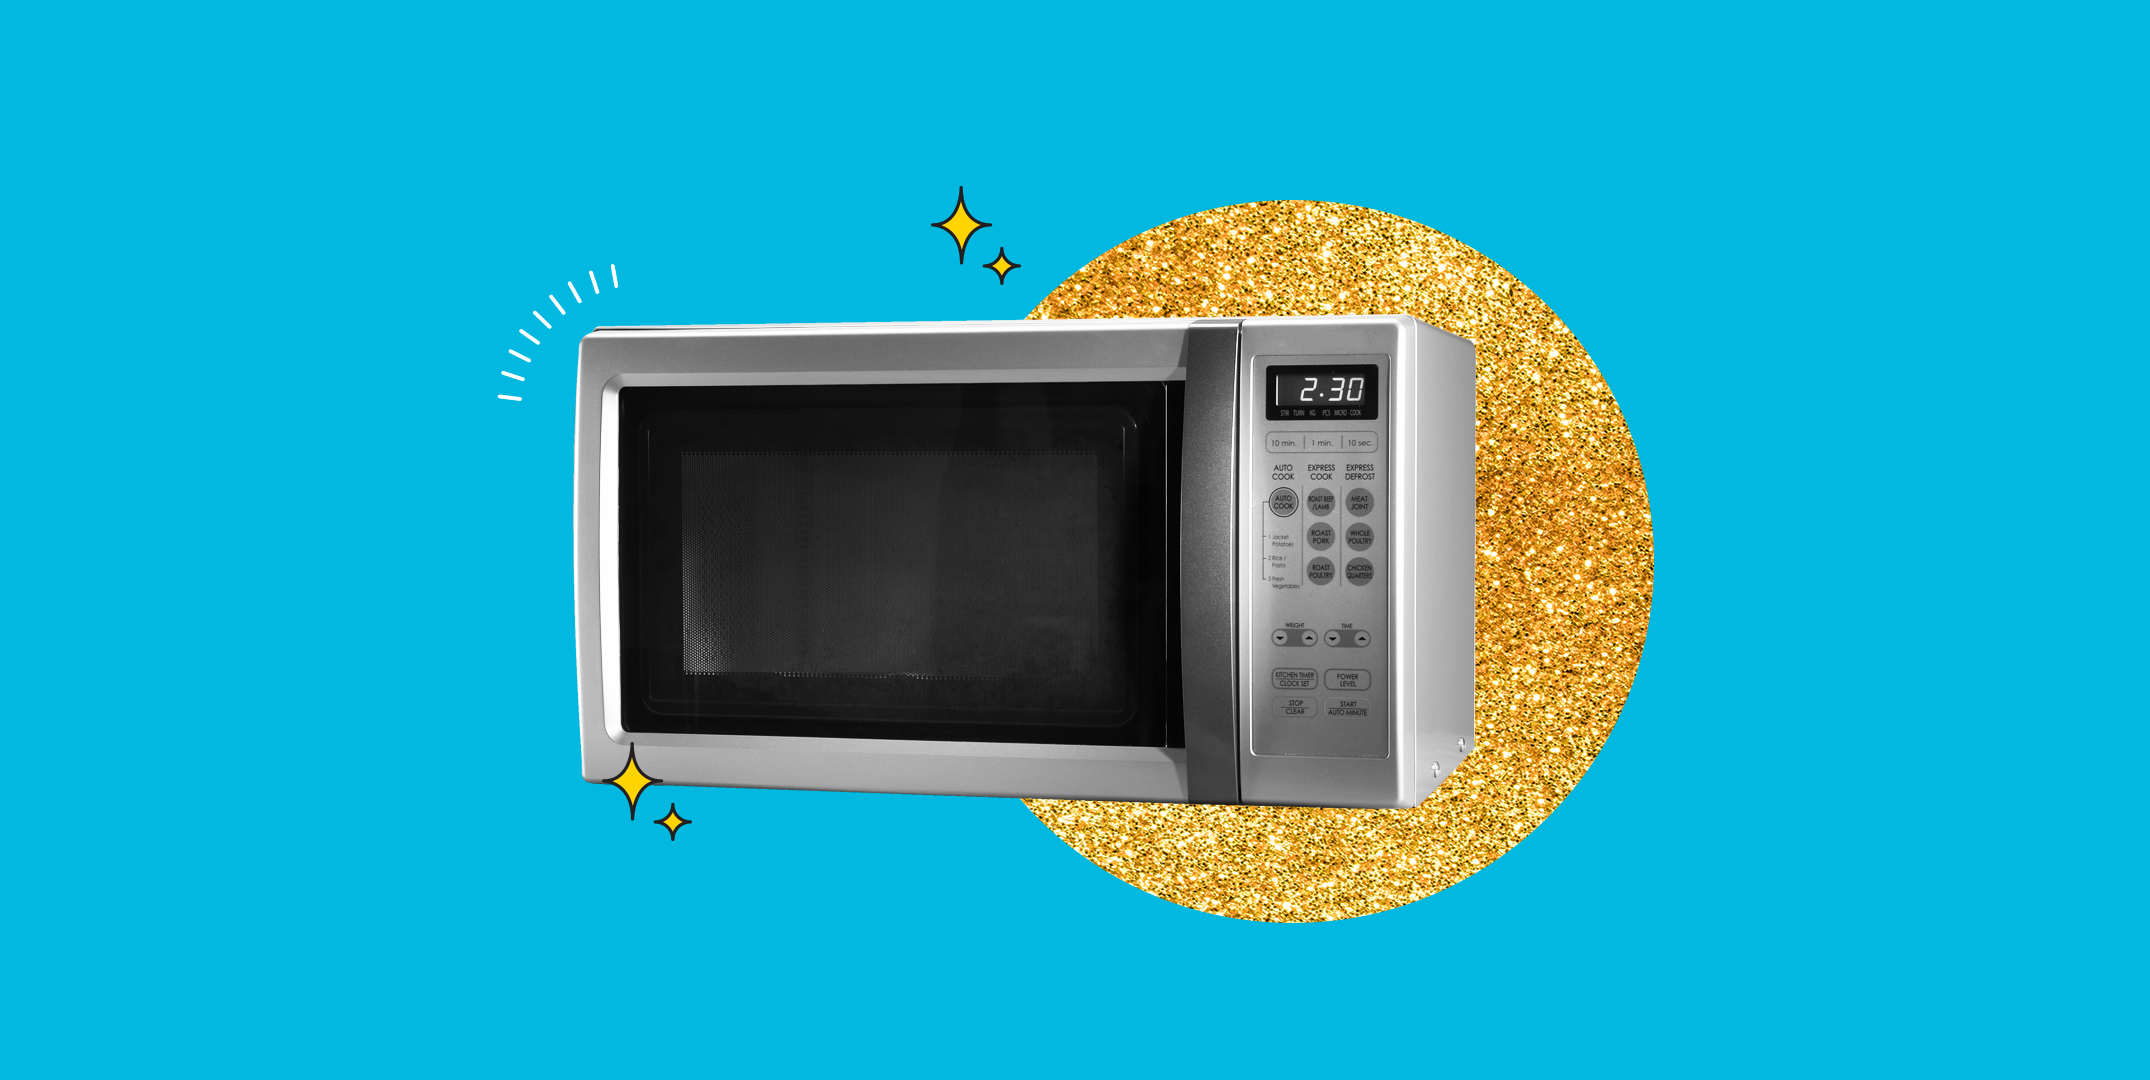 How to clean a microwave oven